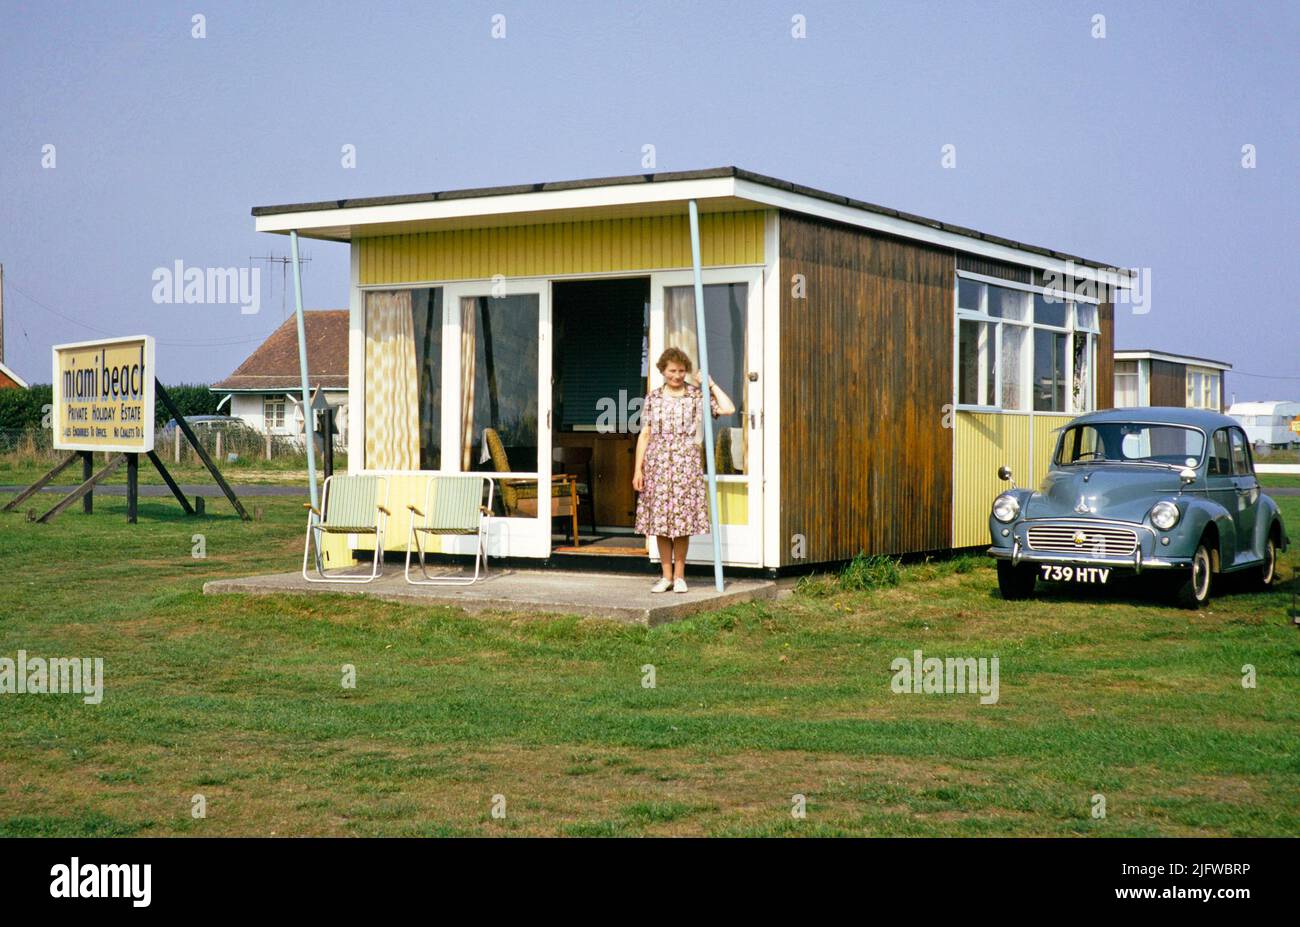 Woman standing in doorway of holiday chalet with Morris Minor car parked, Miami Beach private holiday estate, Sutton on Sea, Lincolnshire, England, UK, 1960s Stock Photo